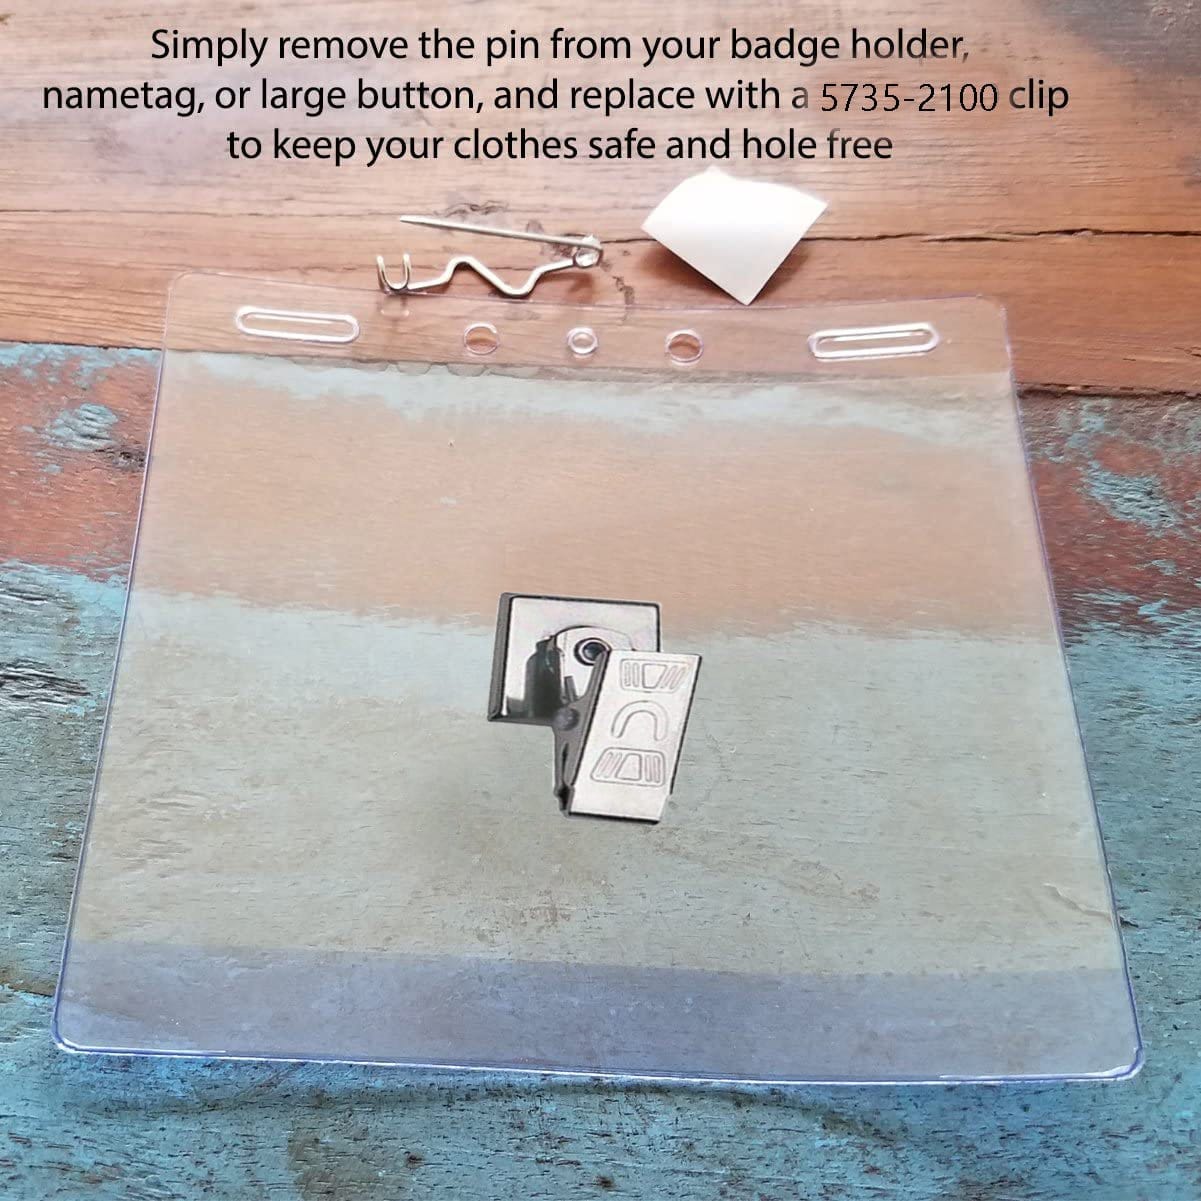 A transparent badge holder is displayed on a wooden surface with a metal clip and a white attachment above it. Instructions for replacing a pin with a Pressure-Sensitive Nickel-Plated Clip, Embossed "U" Bulldog Clip with Adhesive Back 5735-2100 are written on the image.